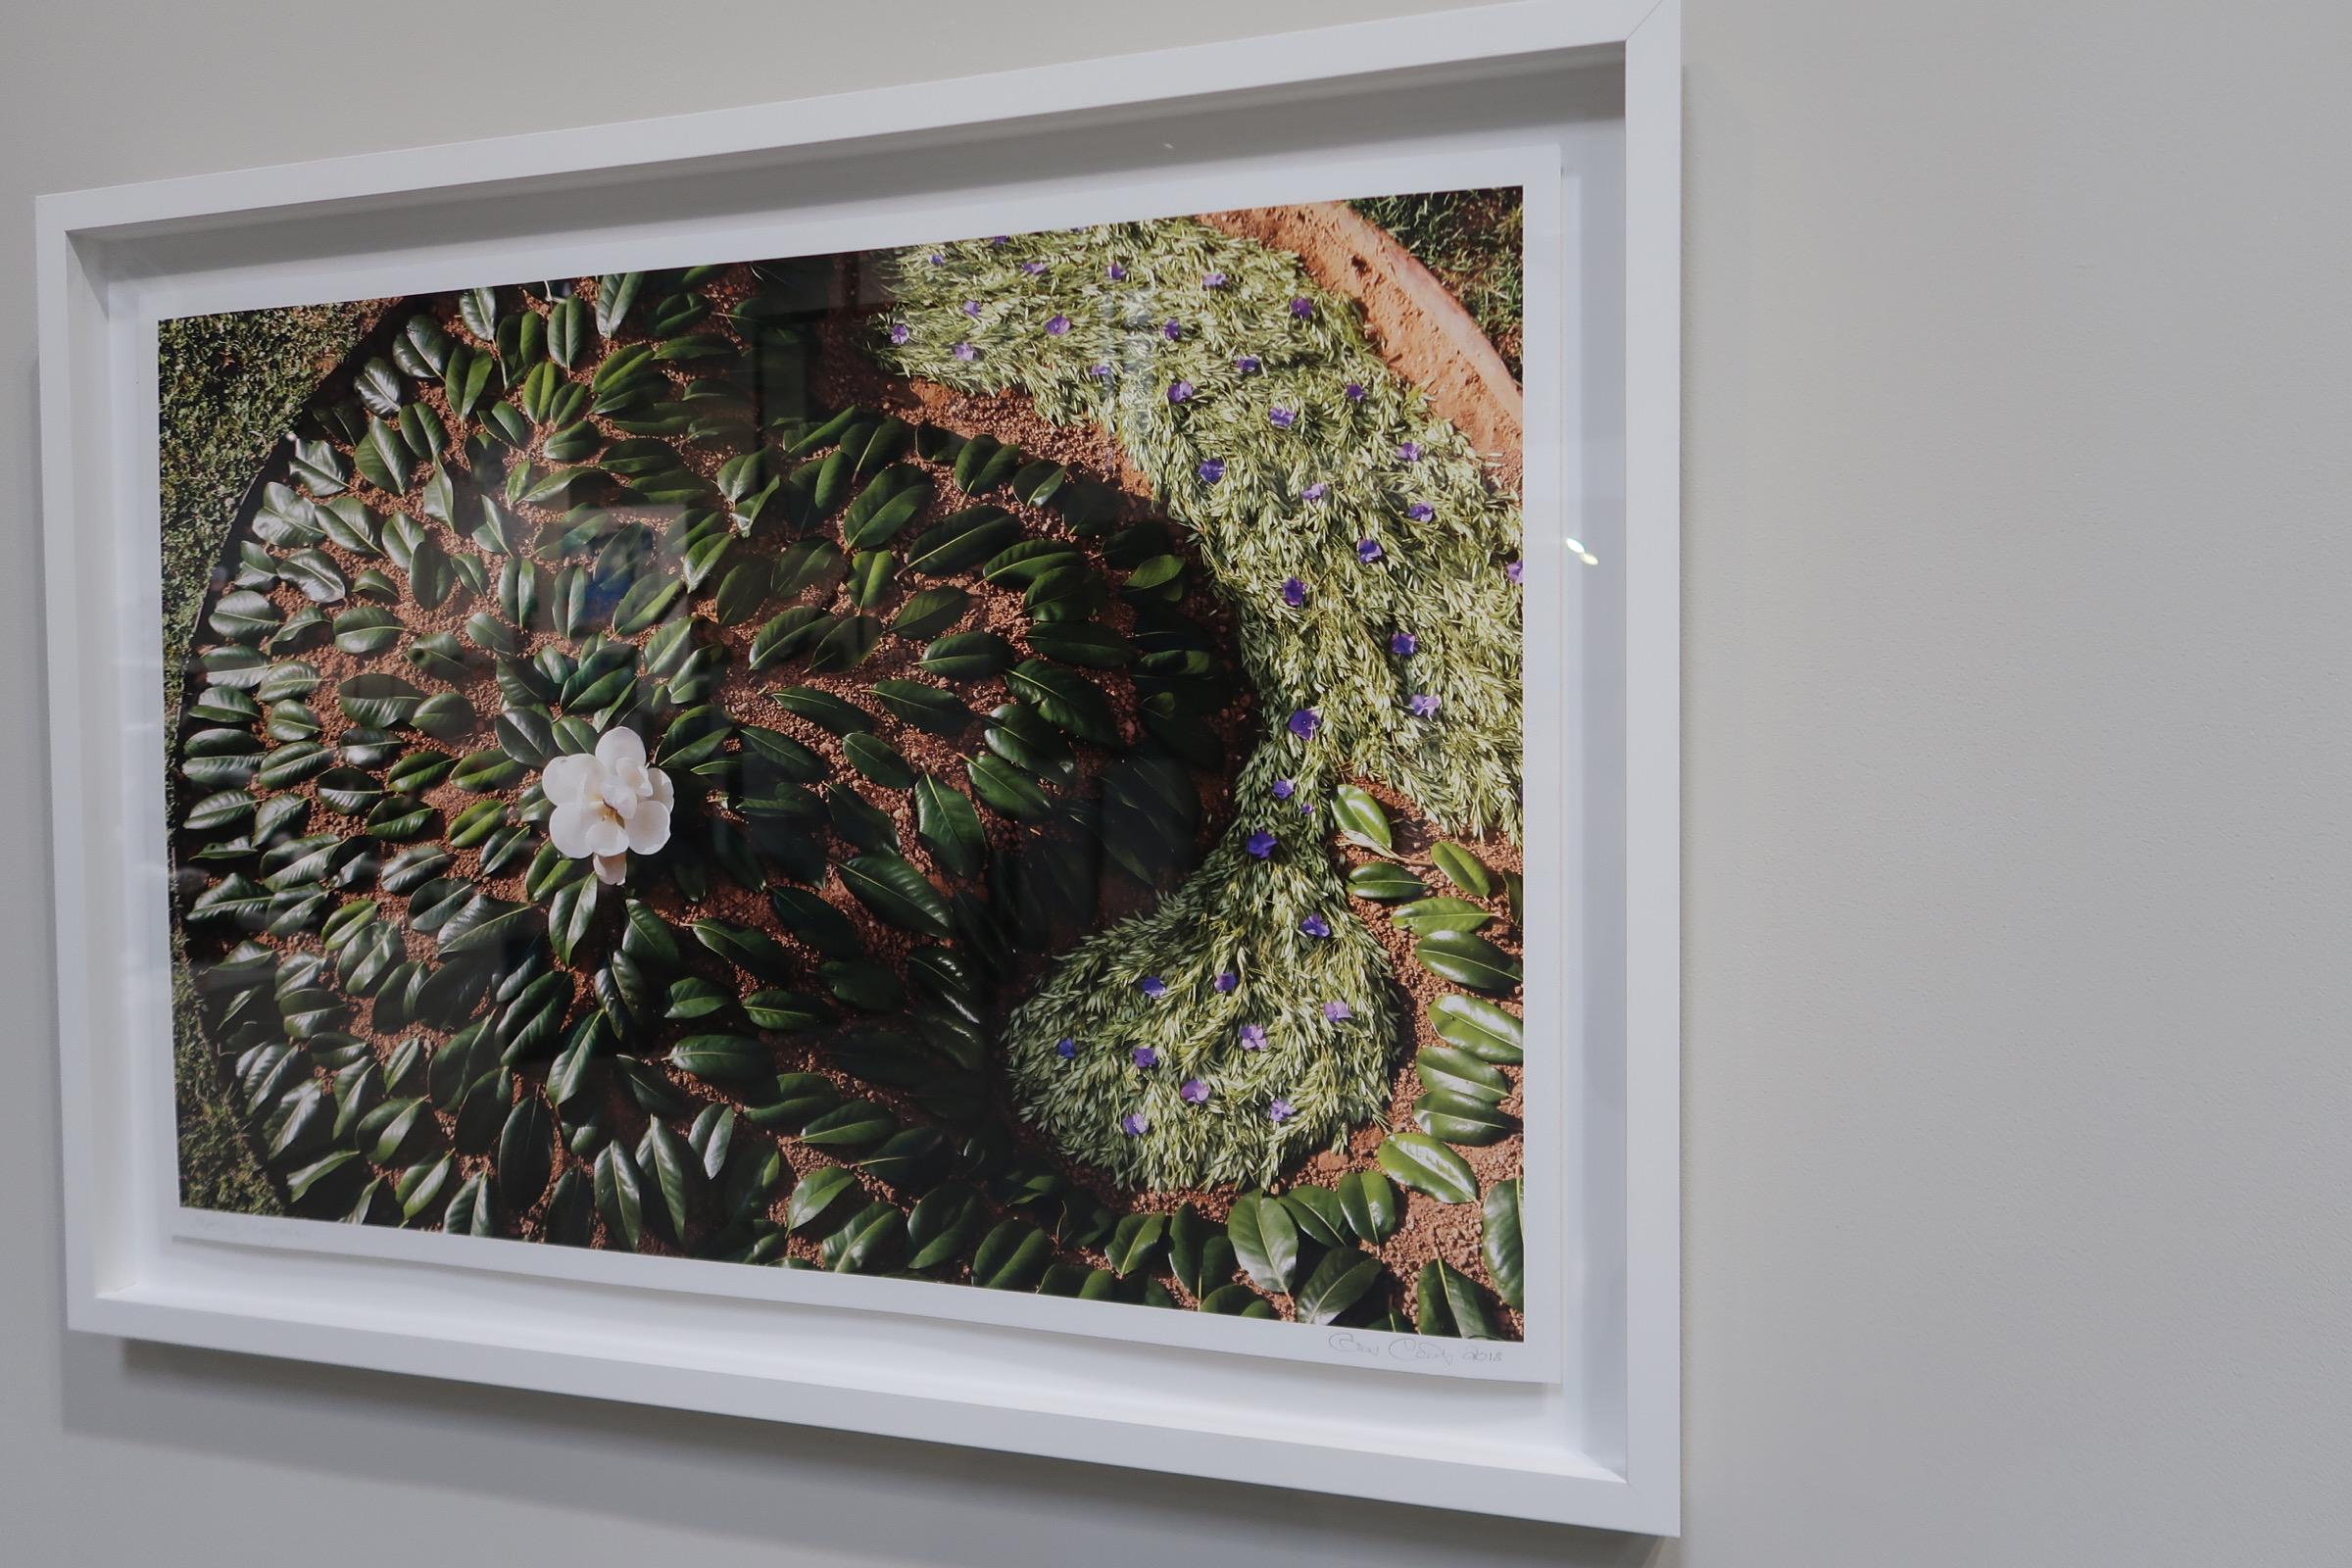 Crista Cammaroto is a prolific interdisciplinary artist whose work focuses on place-making and reconnecting humans with the earth, our primary home. Her Terra Forma print series stems from her three-dimensional earth works. Cammaroto uses natural